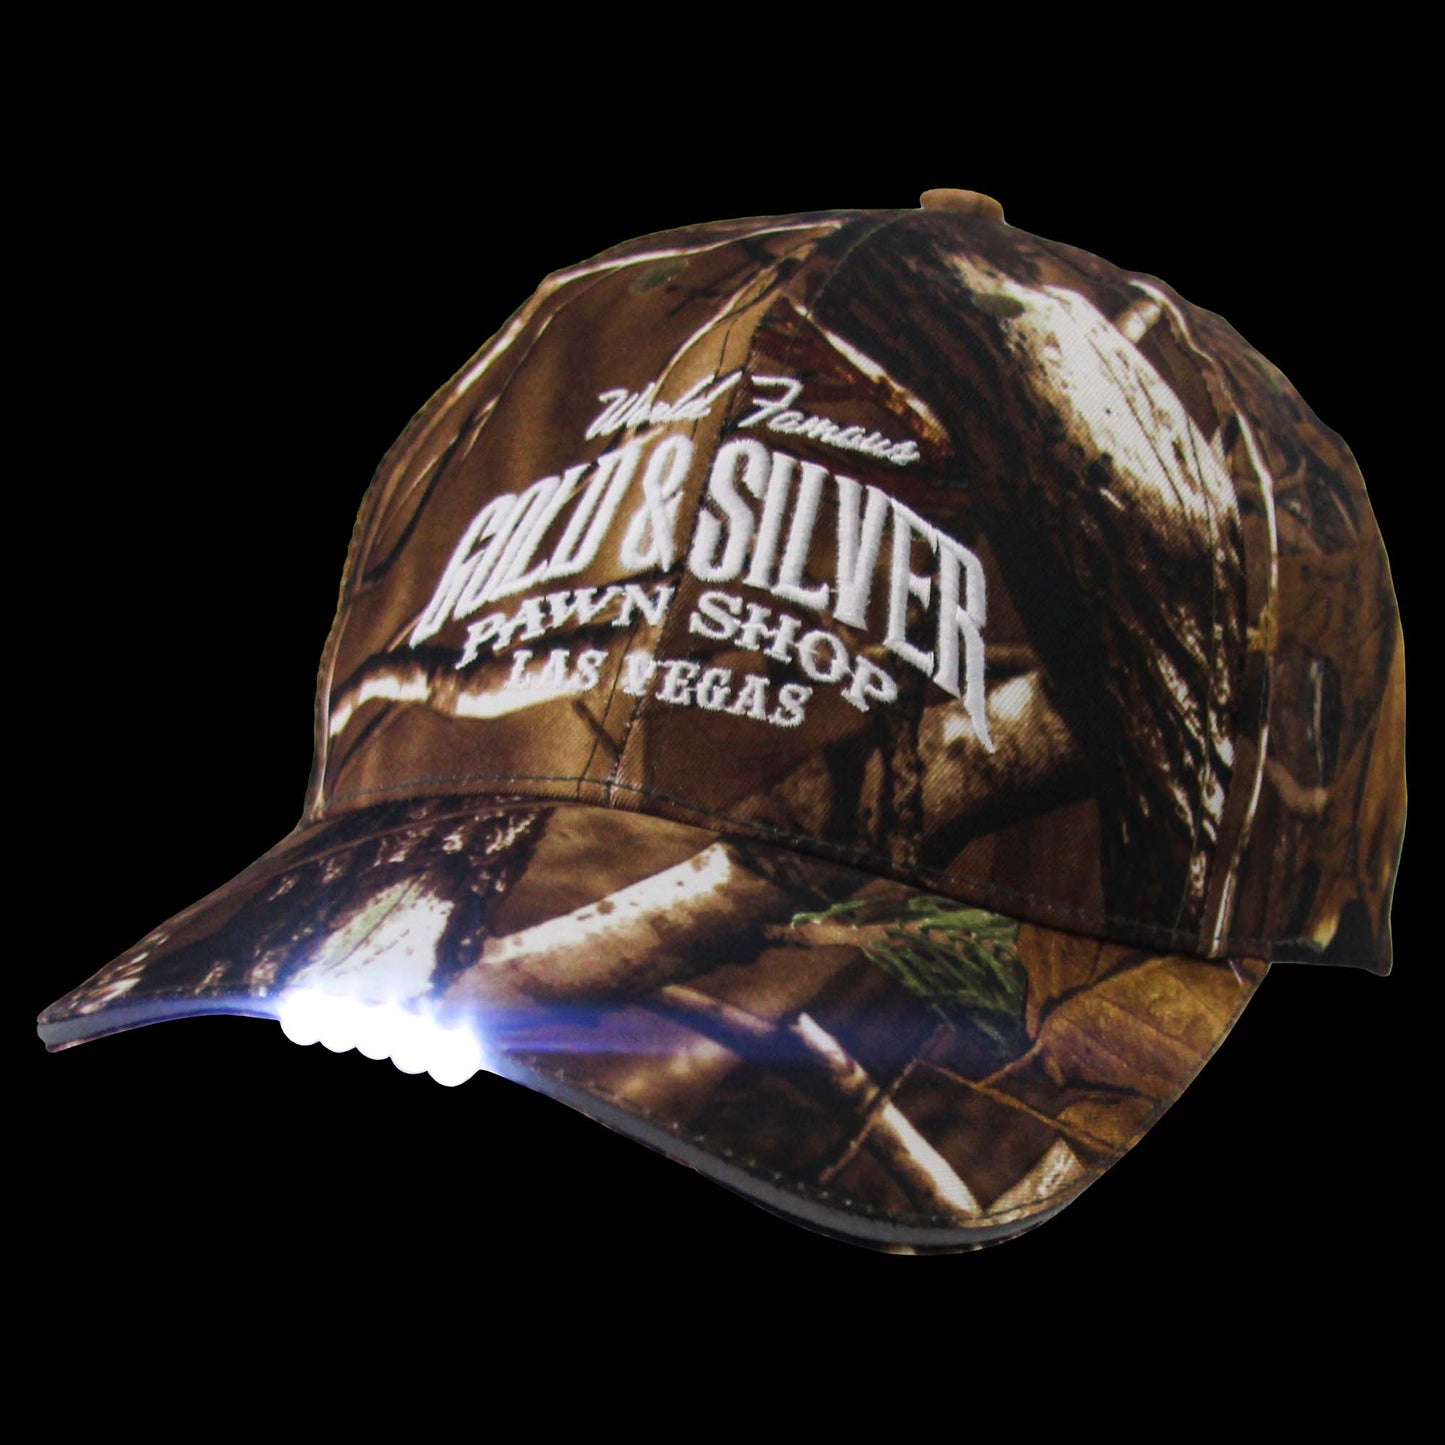 Gold & Silver Pawn Shop Camouflage Light Hat Black 